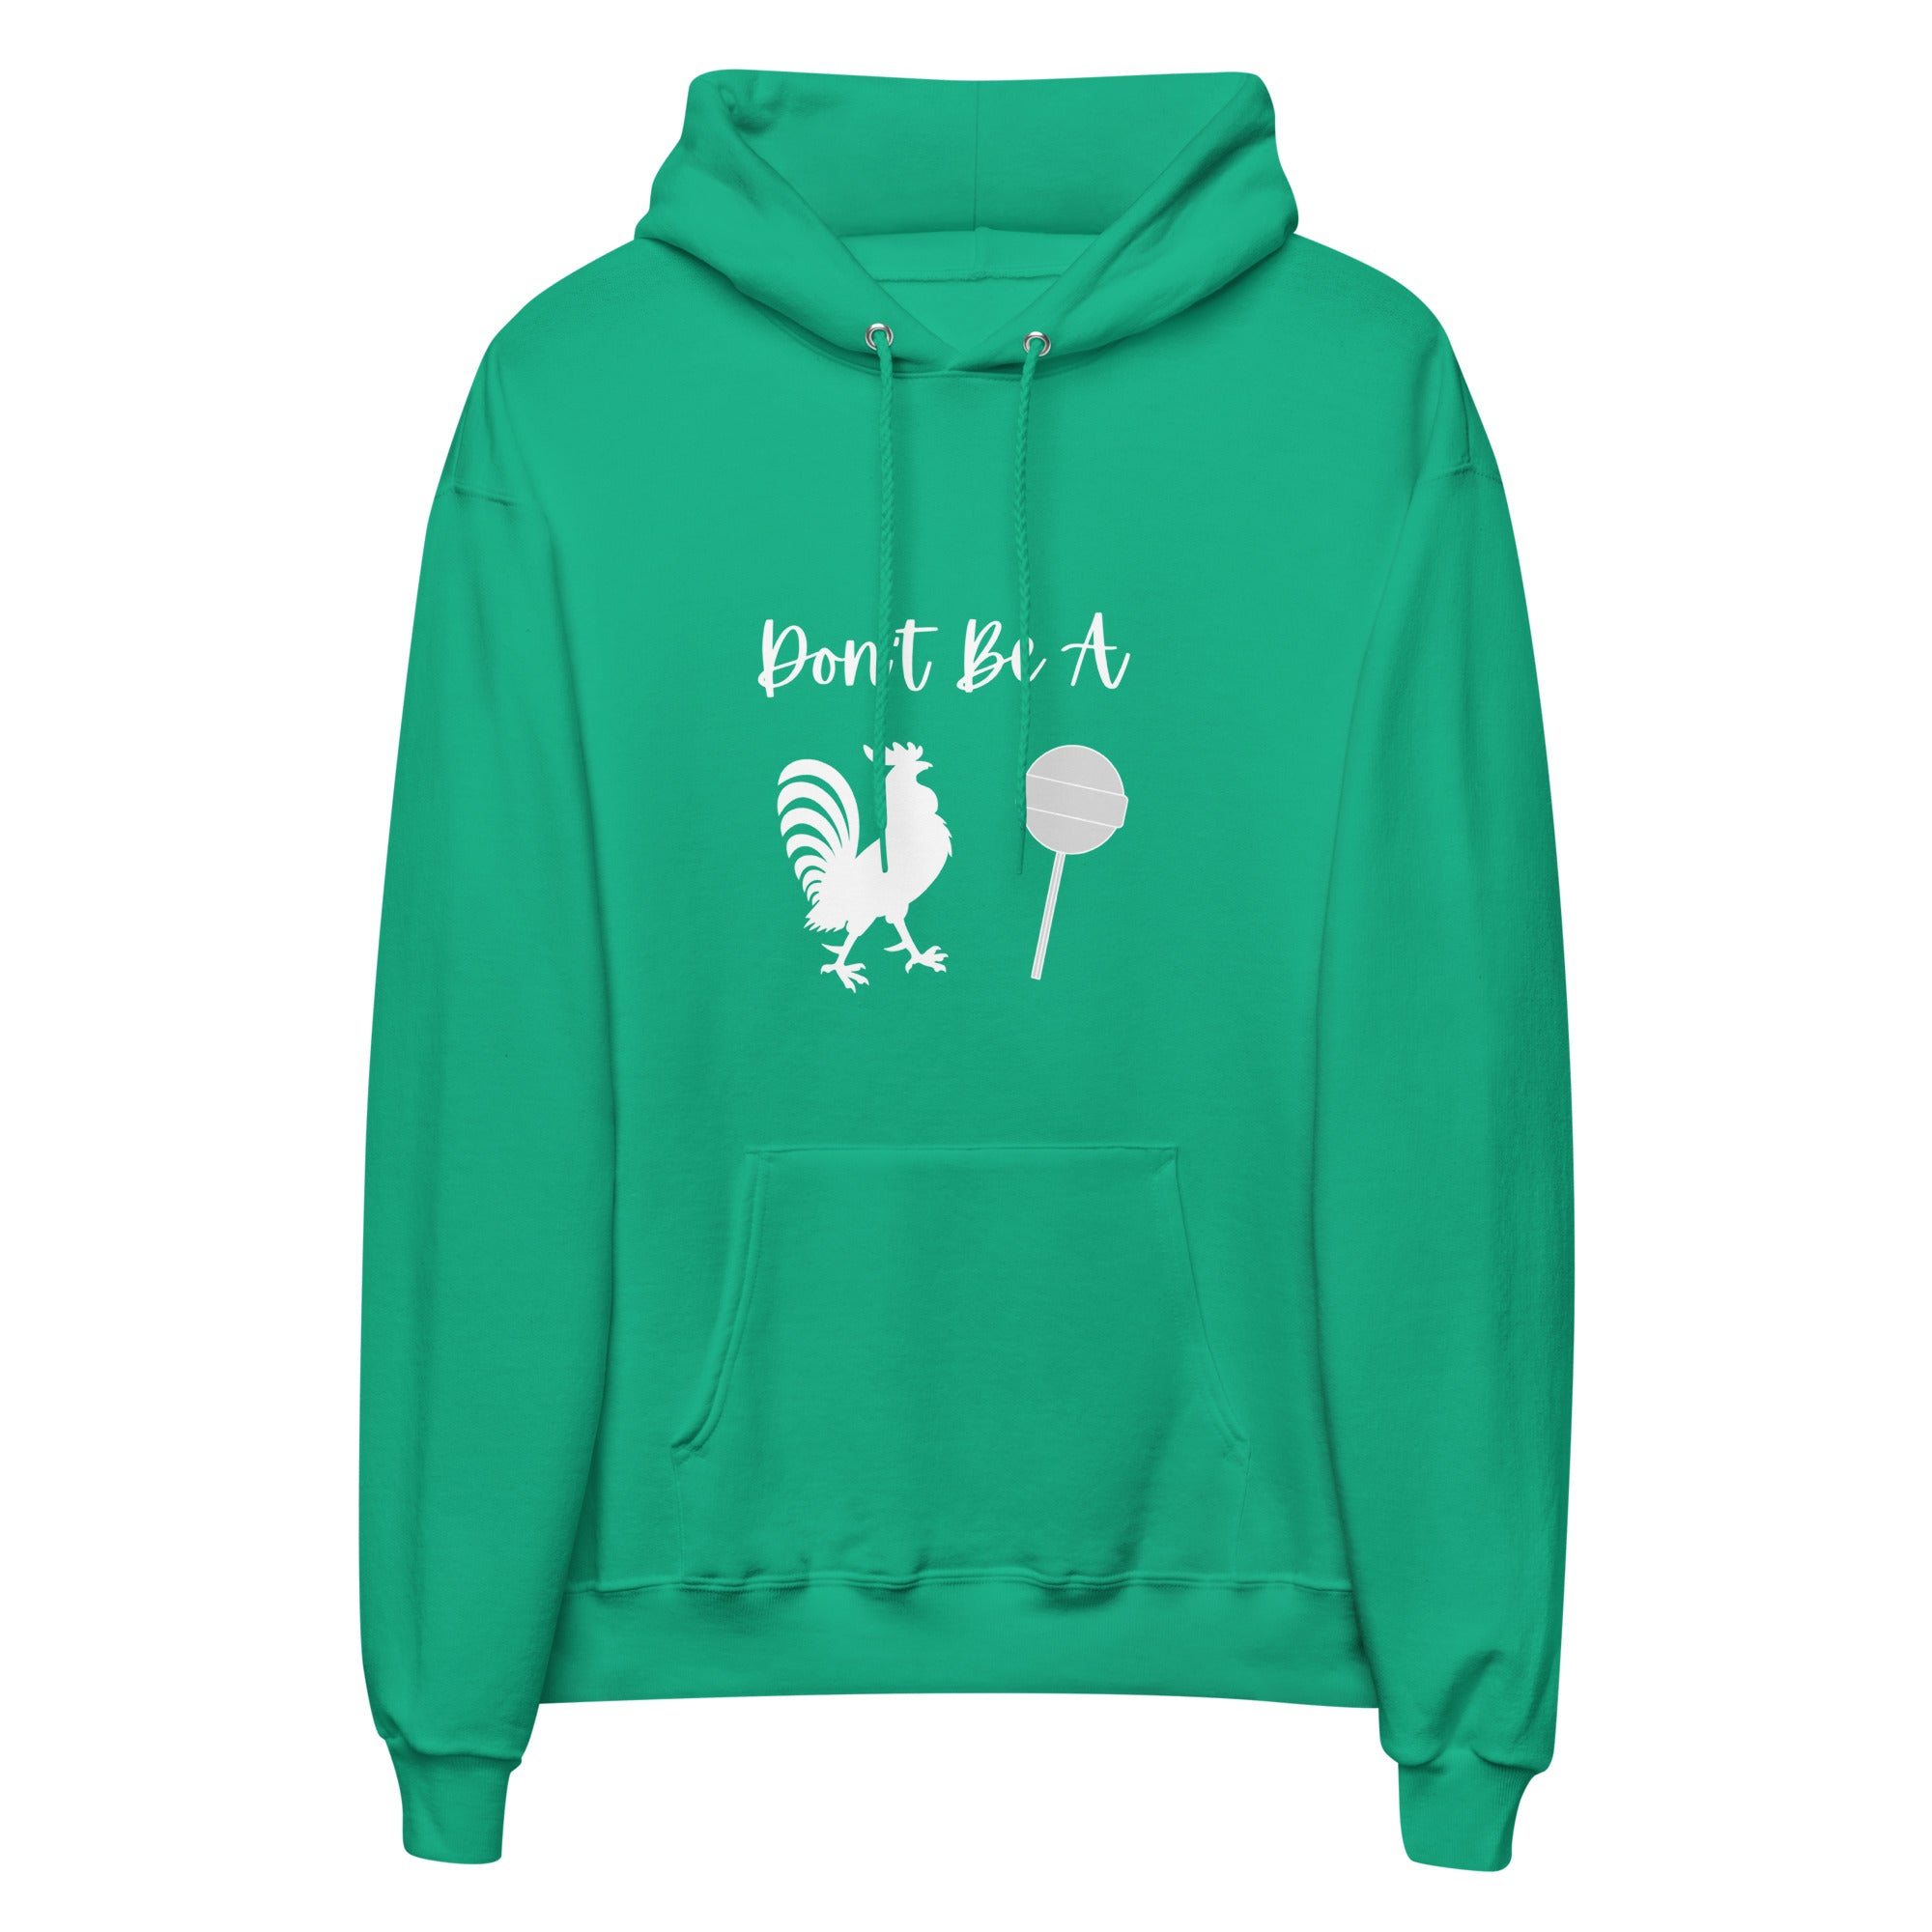 Don't Be A Cock Sucker Hoodie